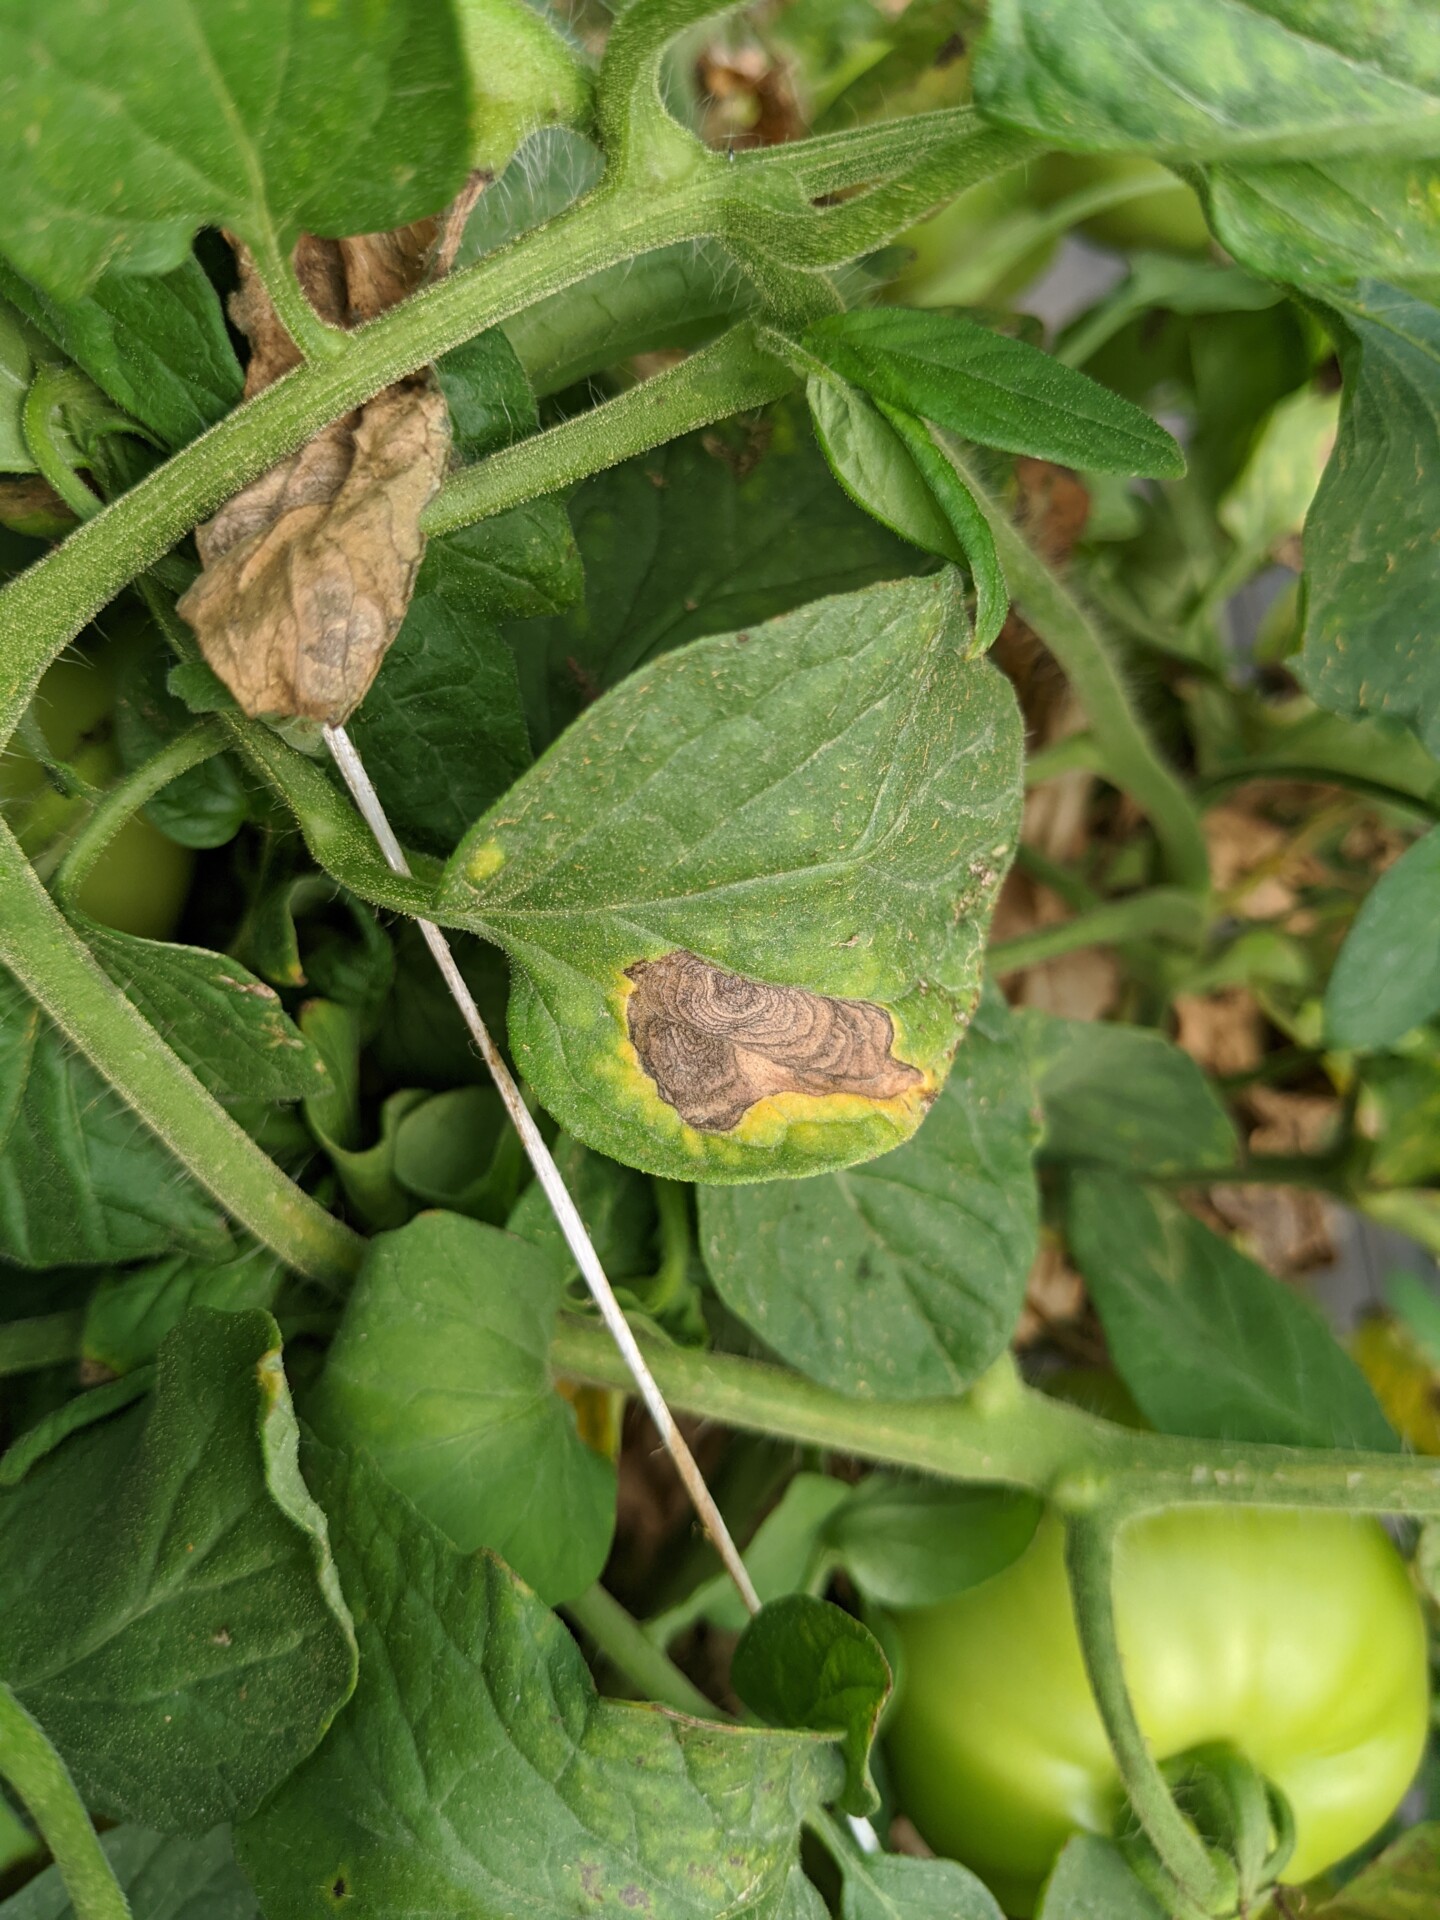 Early blight lesion on tomato leaf. Note lesion is restricted by vein.